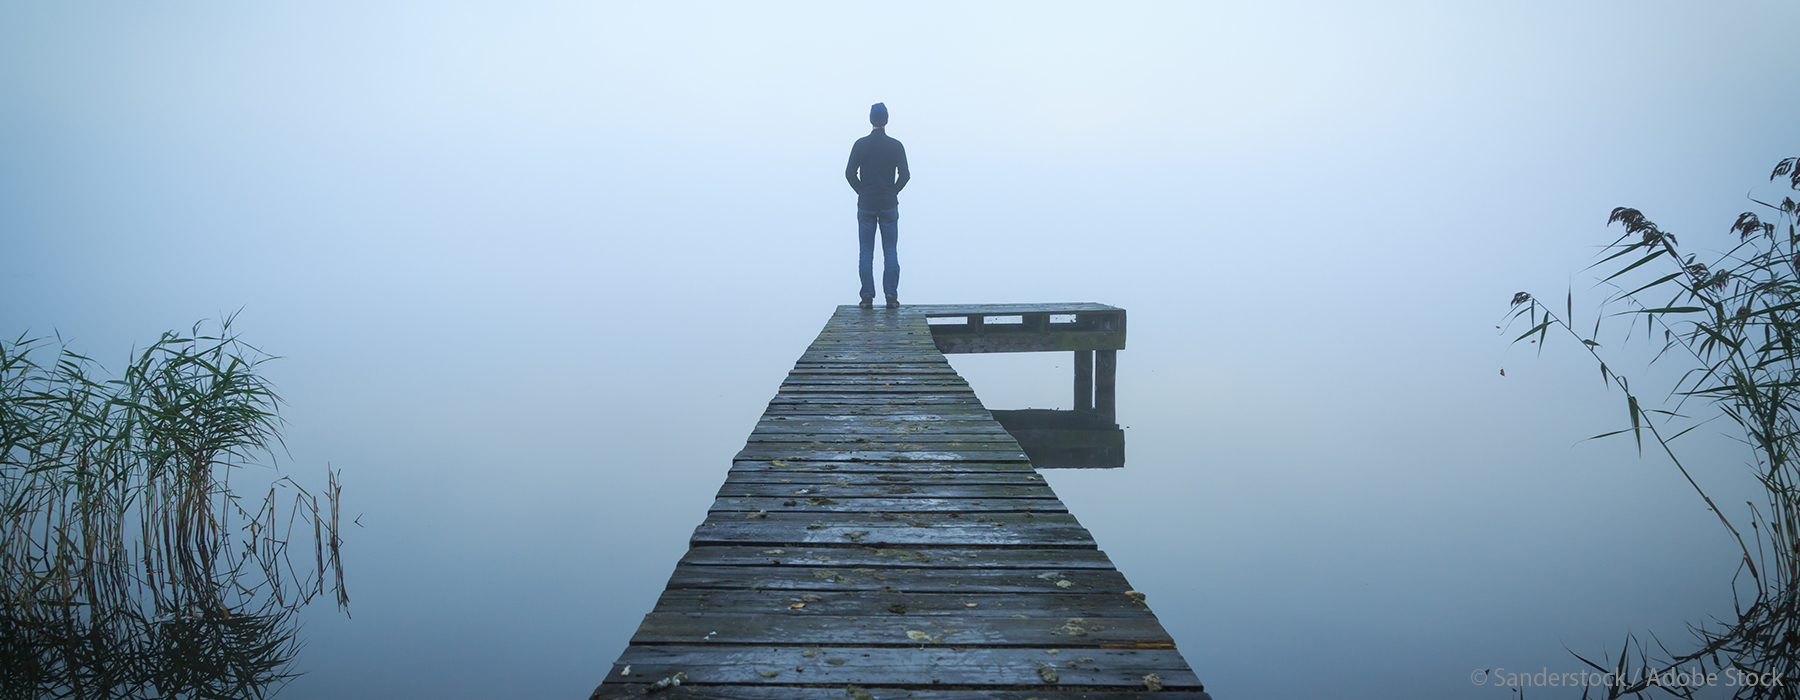 Image of man standing on pier